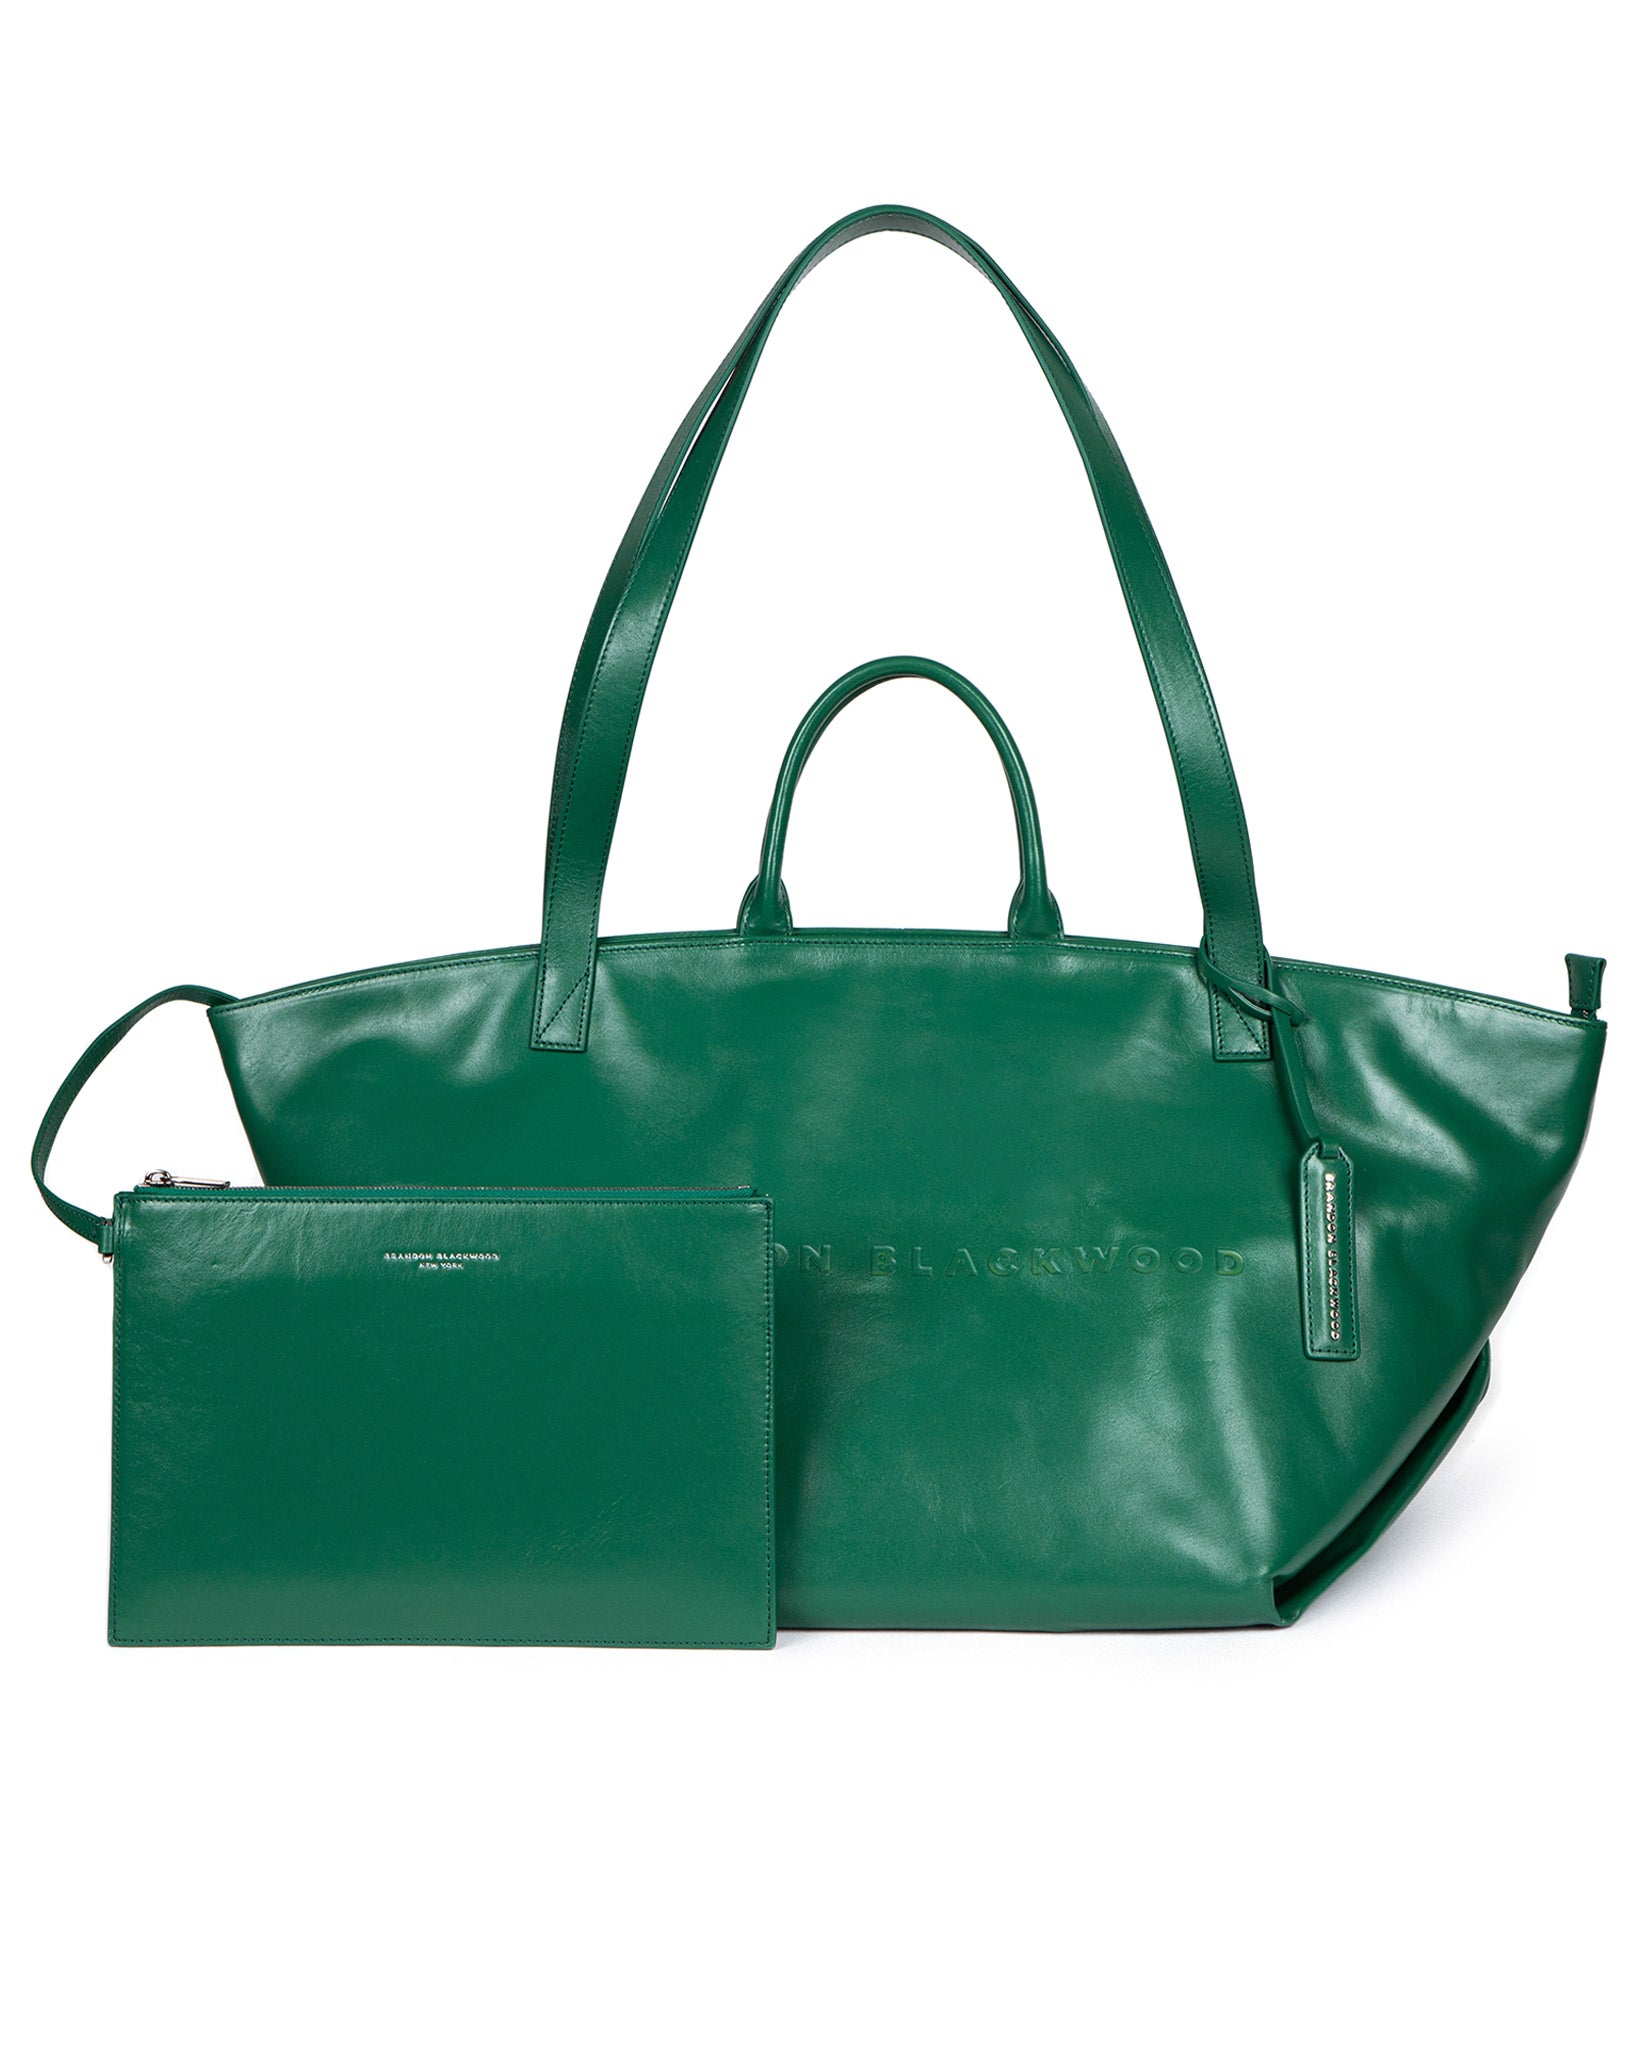 Brandon Blackwood New York - Everyday Tote - Forest Green Leather